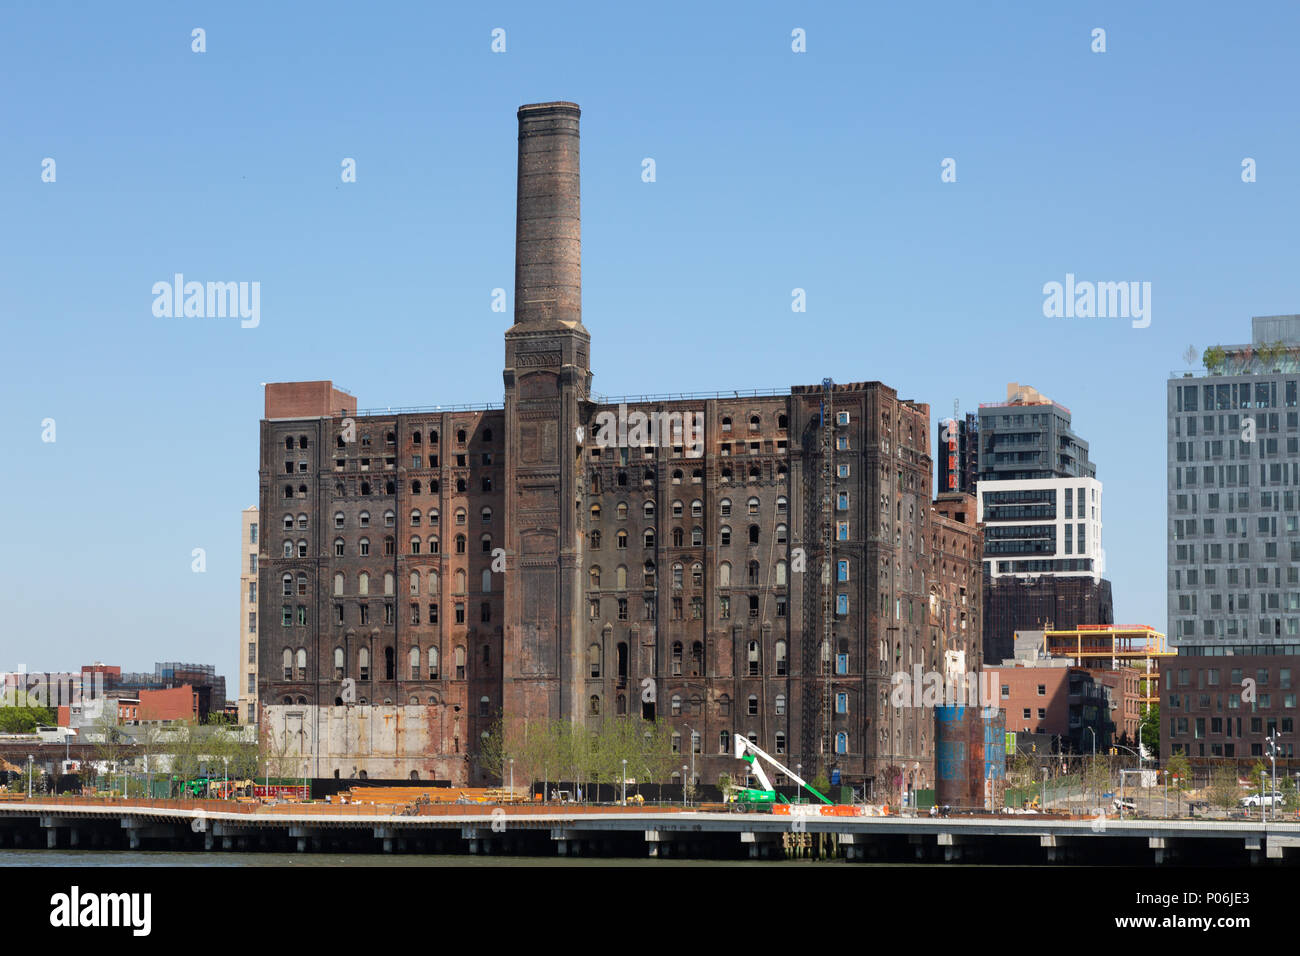 A disused warehouse building on the banks of the East River, New York city USA Stock Photo